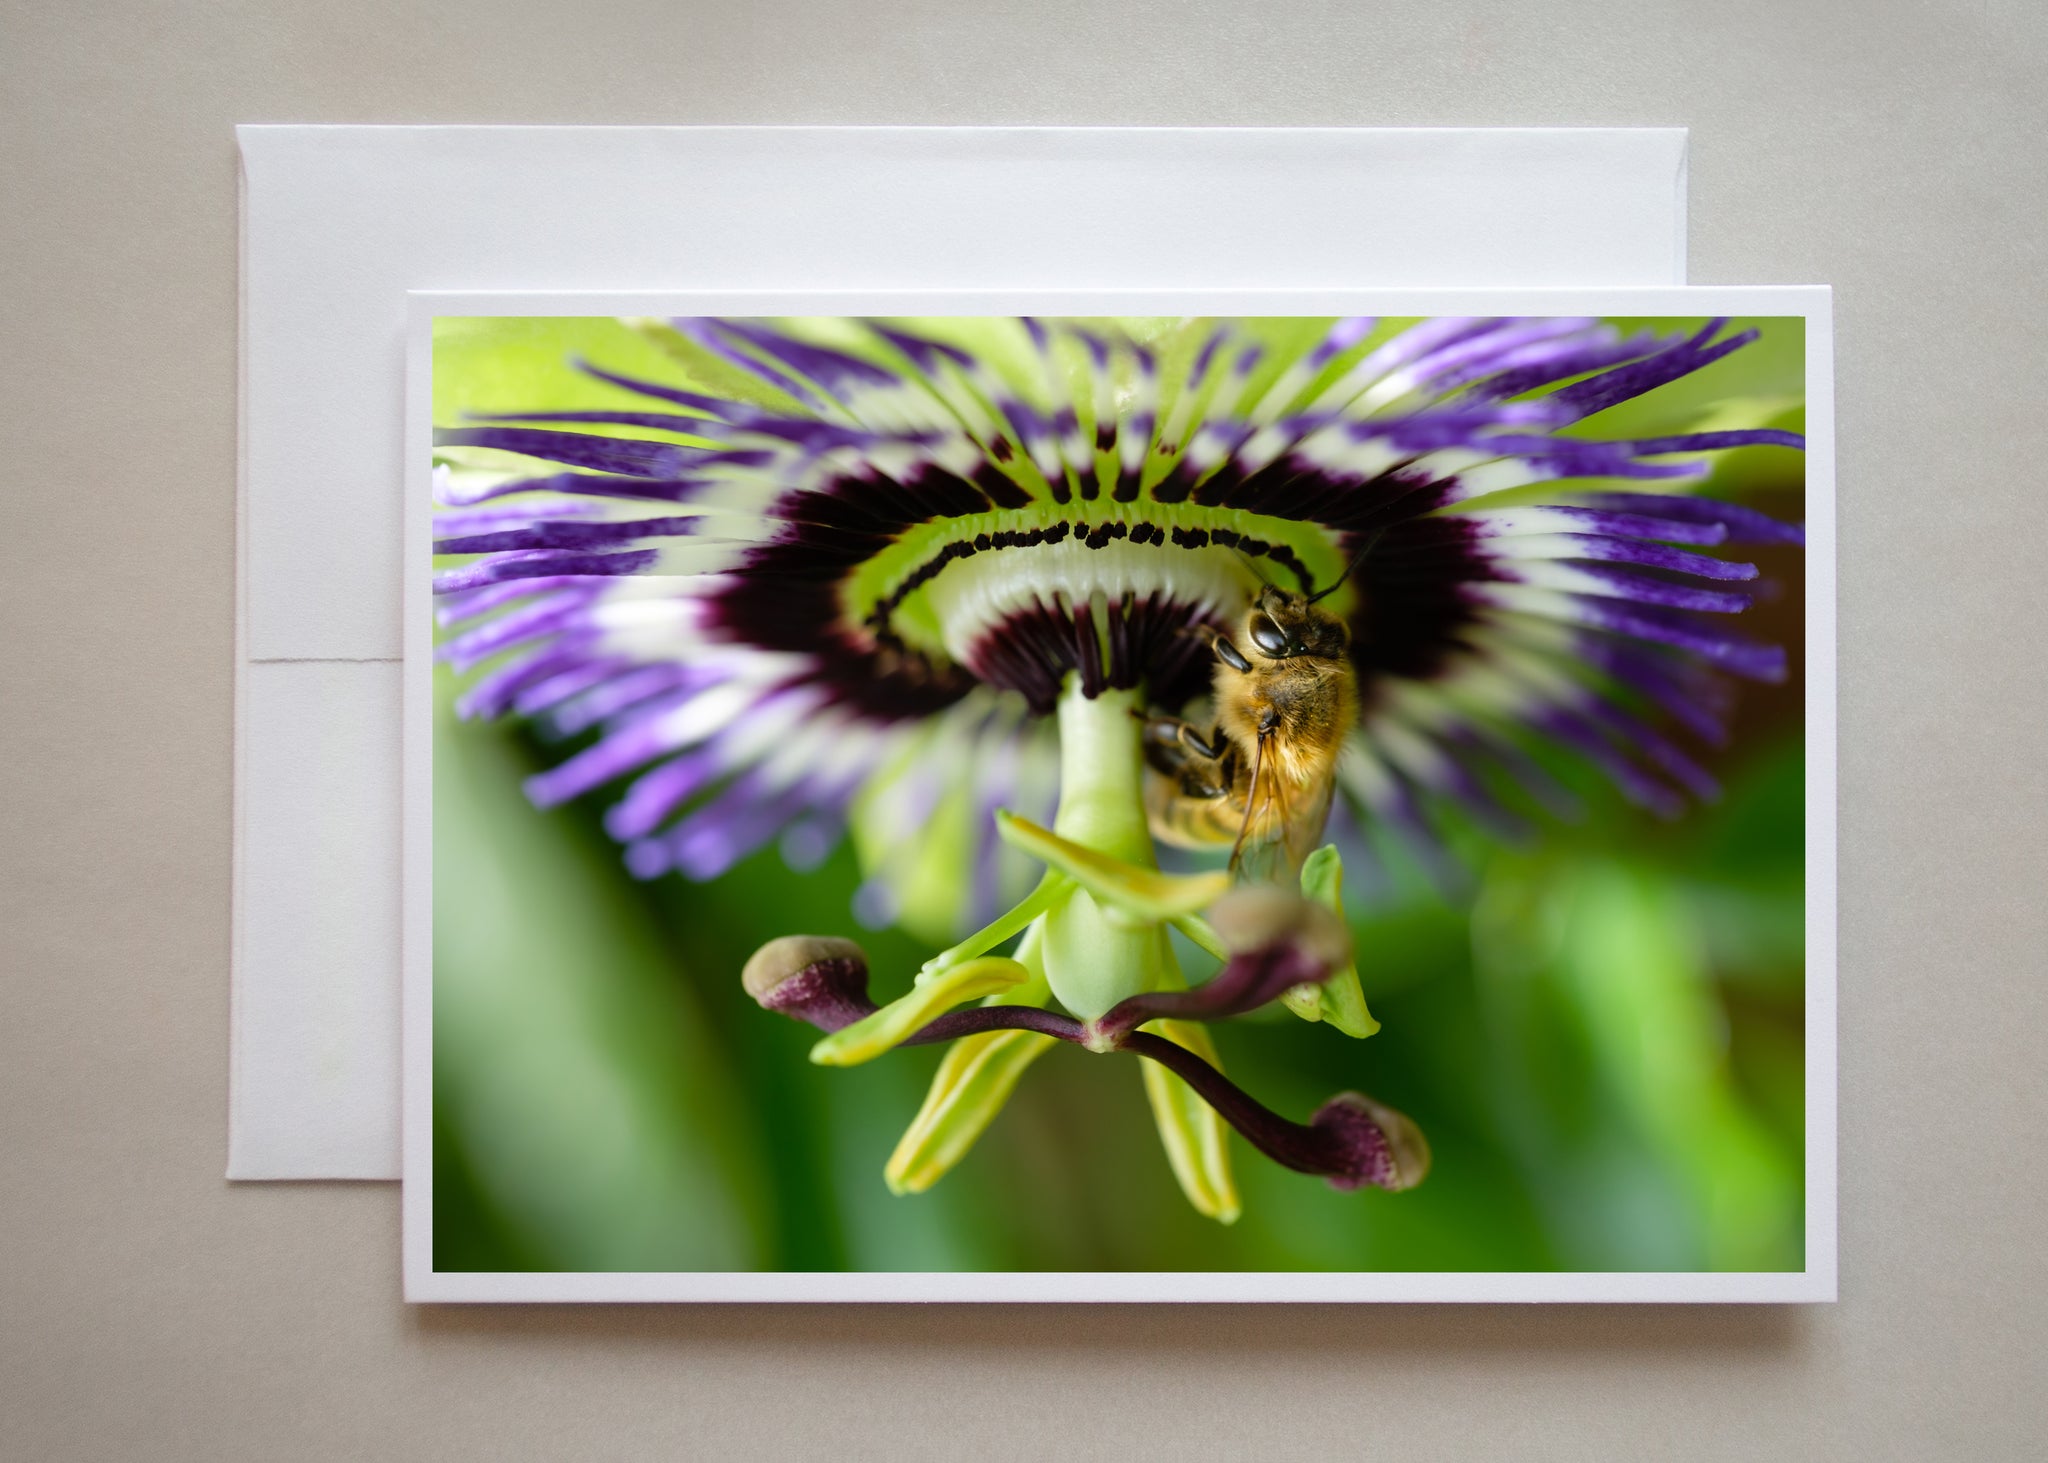 A photograph of a honey bee feeding on a gorgeous purple, white and green passion flower by photographer Judy Harrison Cochand.